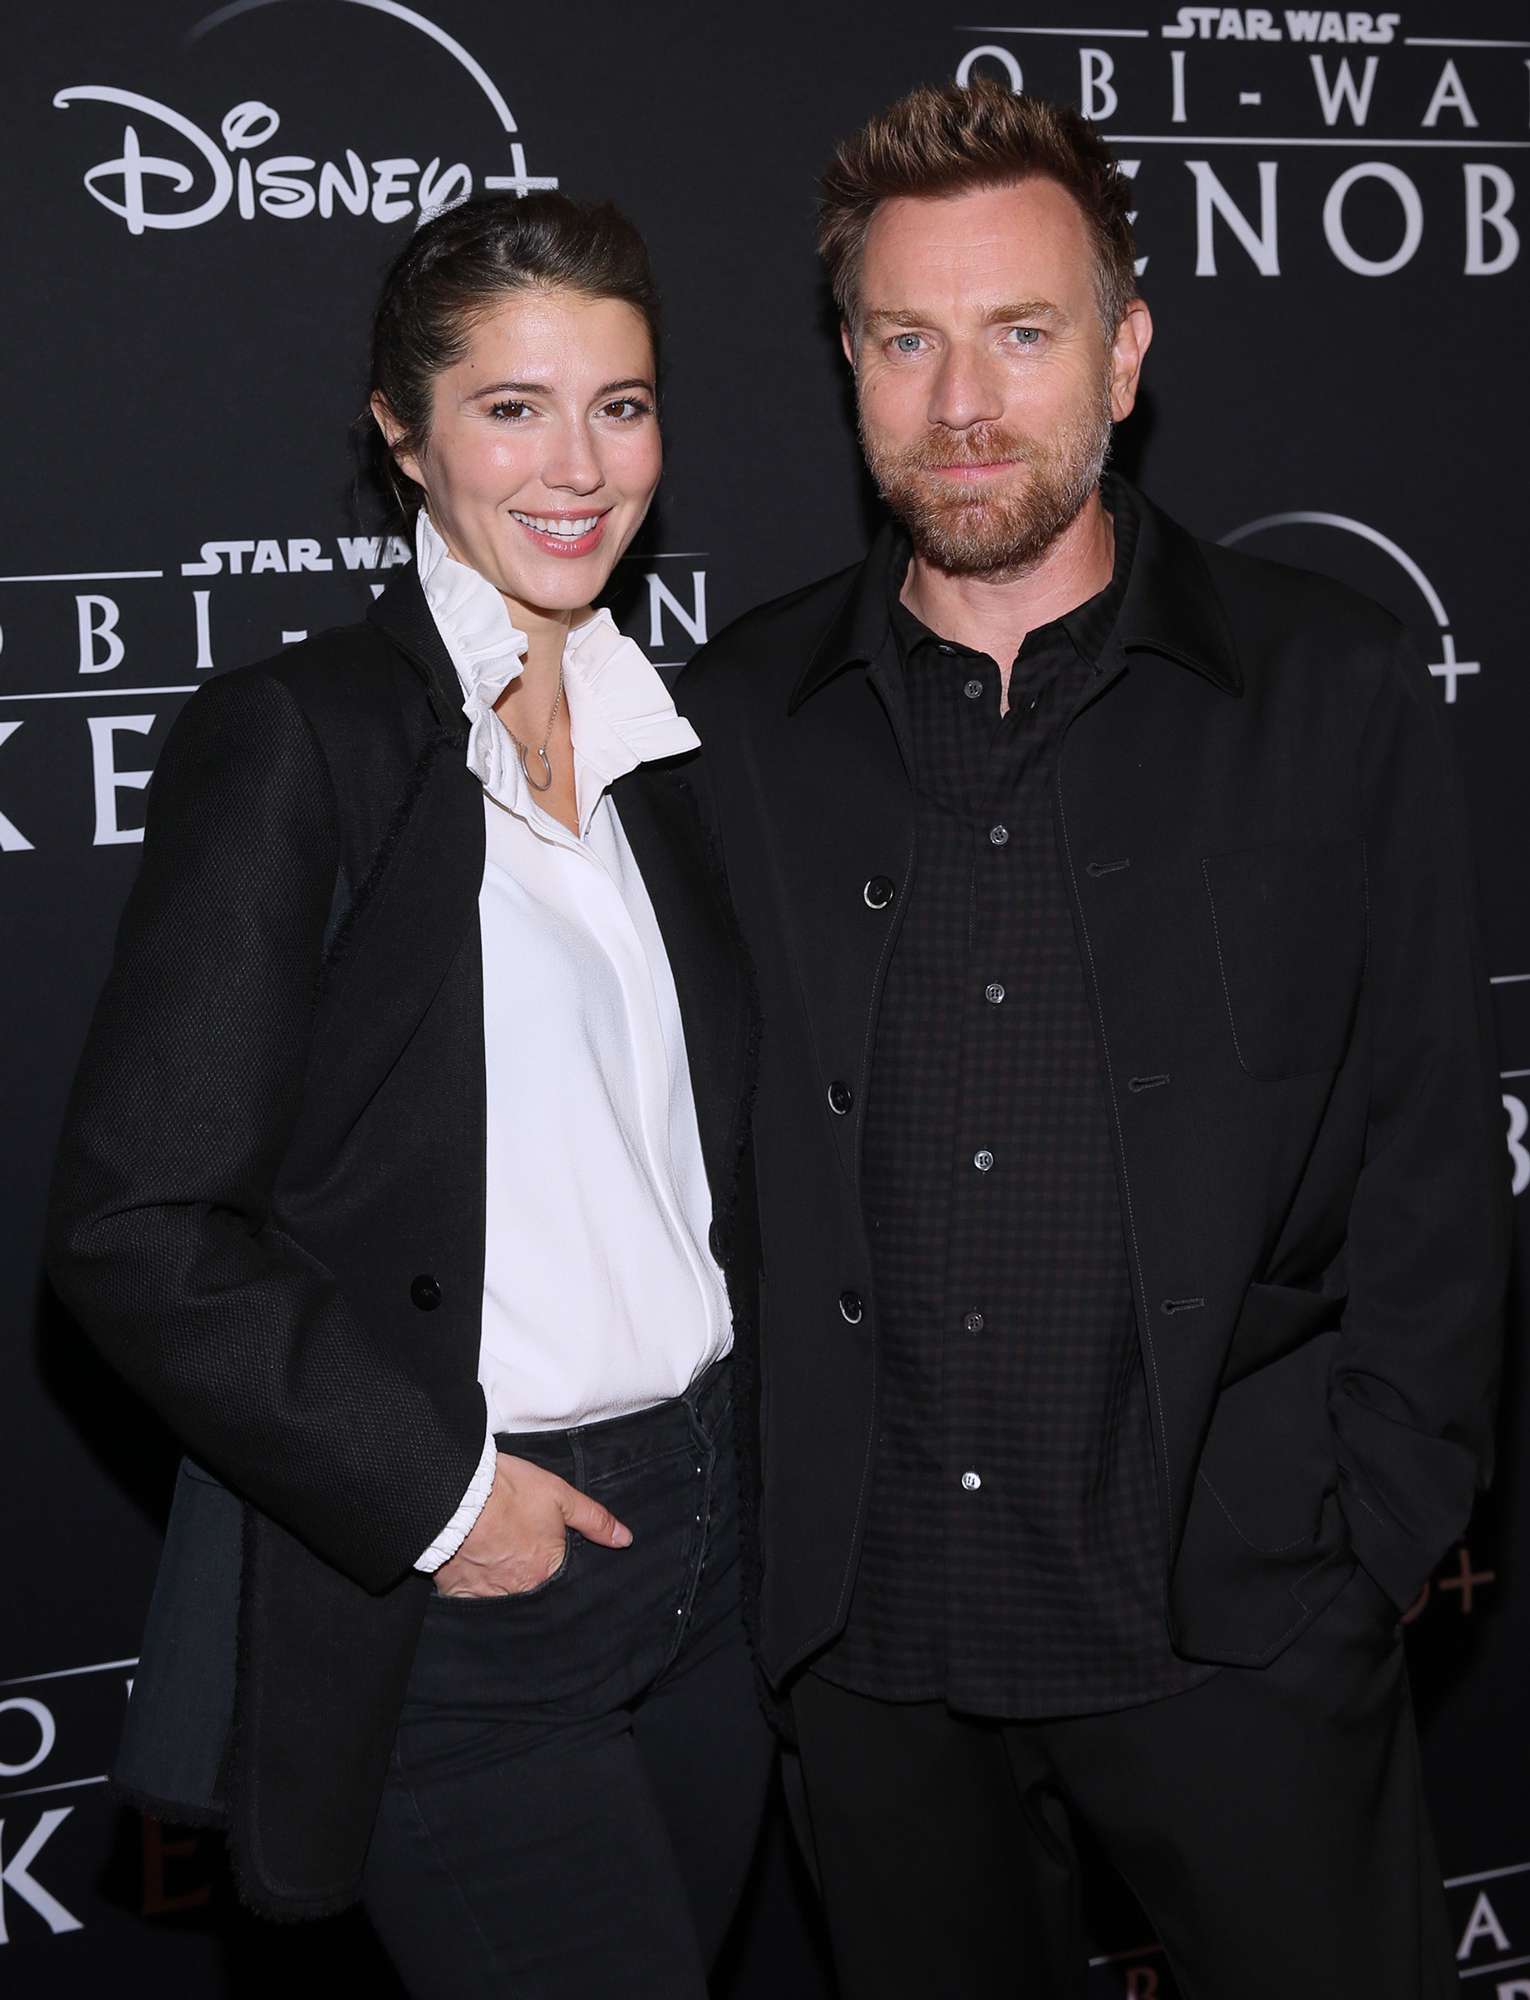 Mary Elizabeth Winstead and Ewan McGregor attend a surprise premiere of the first two episodes of “Obi-Wan Kenobi” at Star Wars Celebration in Anaheim, California on May 26th. The series streams exclusively on Disney+.